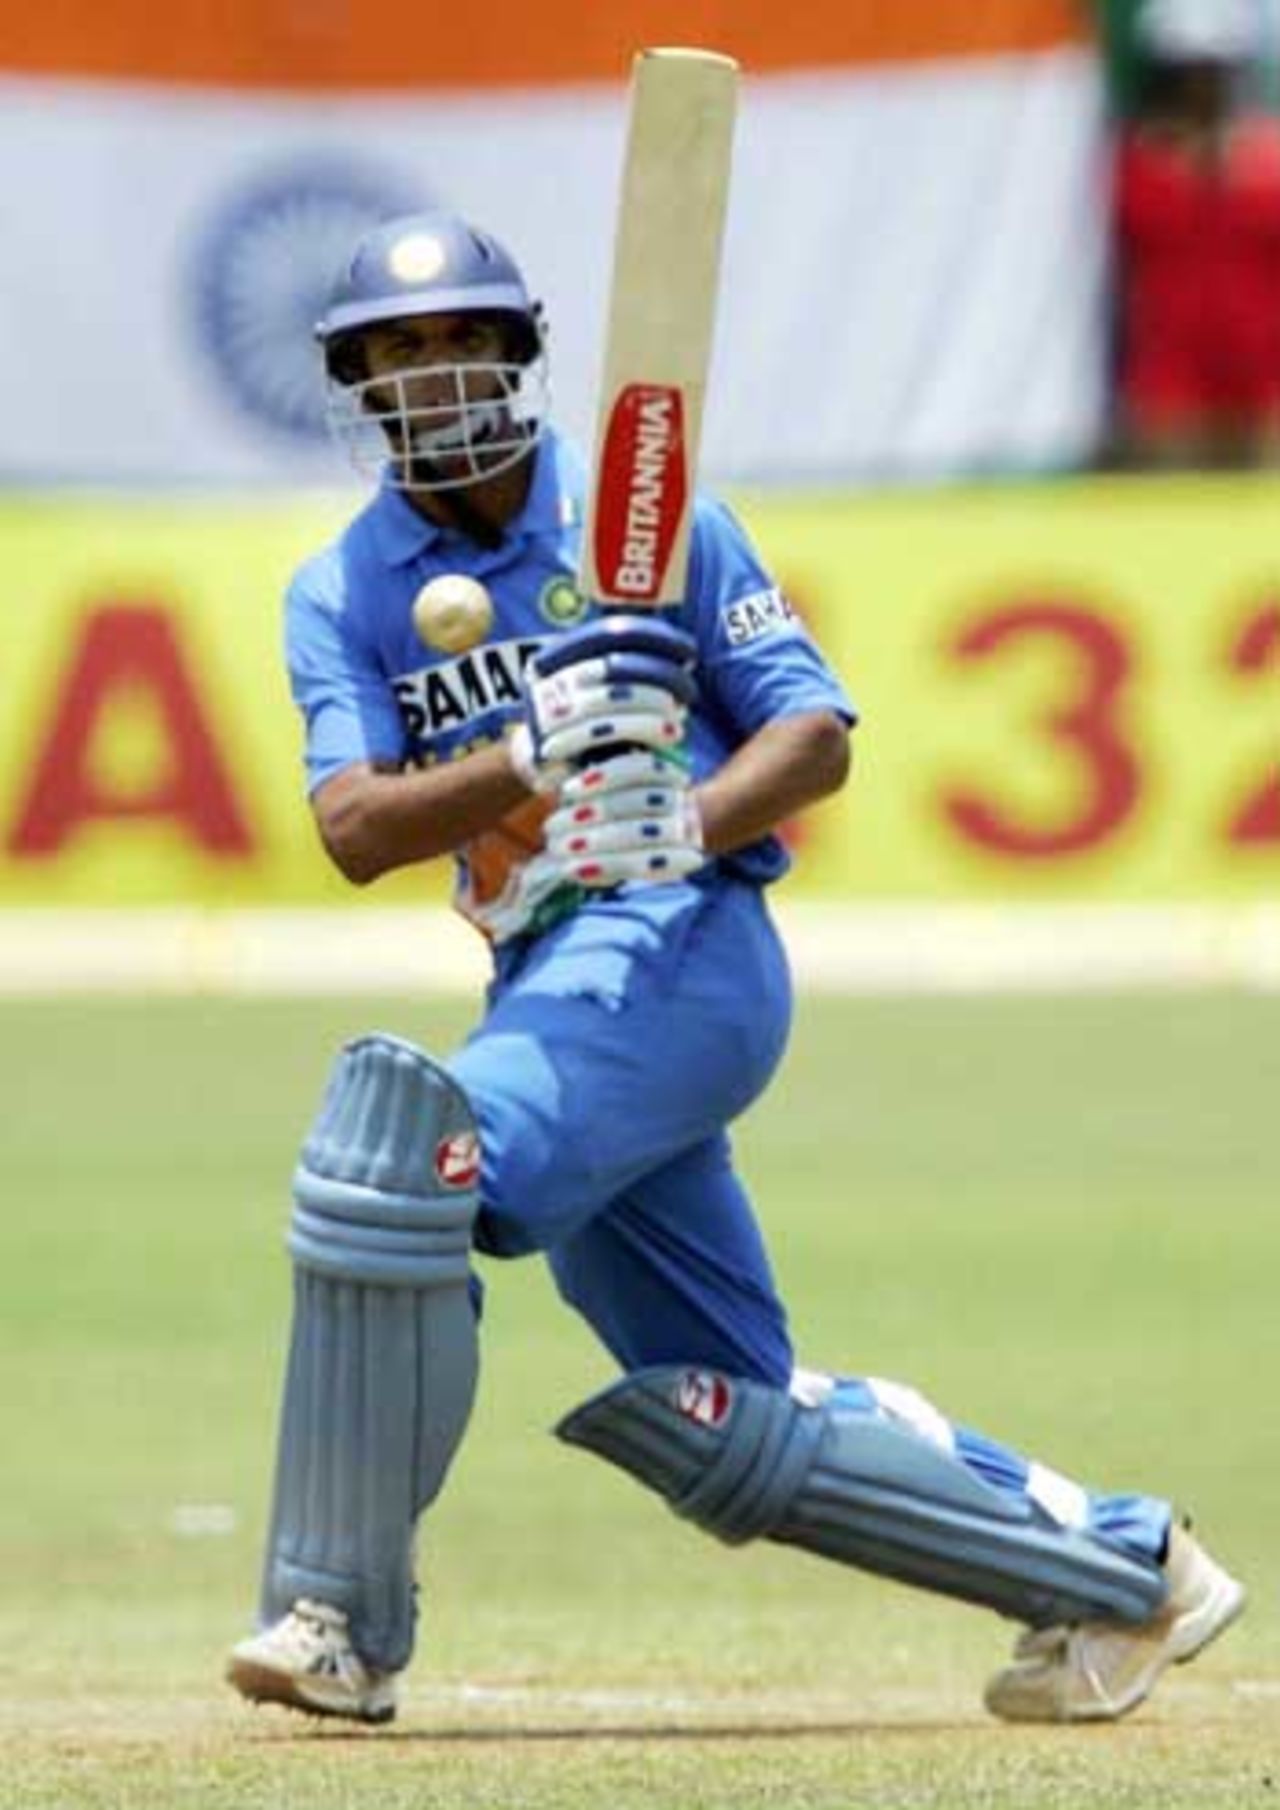 Rahul Dravid was in control in the course of his invaluable century, India v Pakistan, 1st ODI, Kochi, April 2, 2005